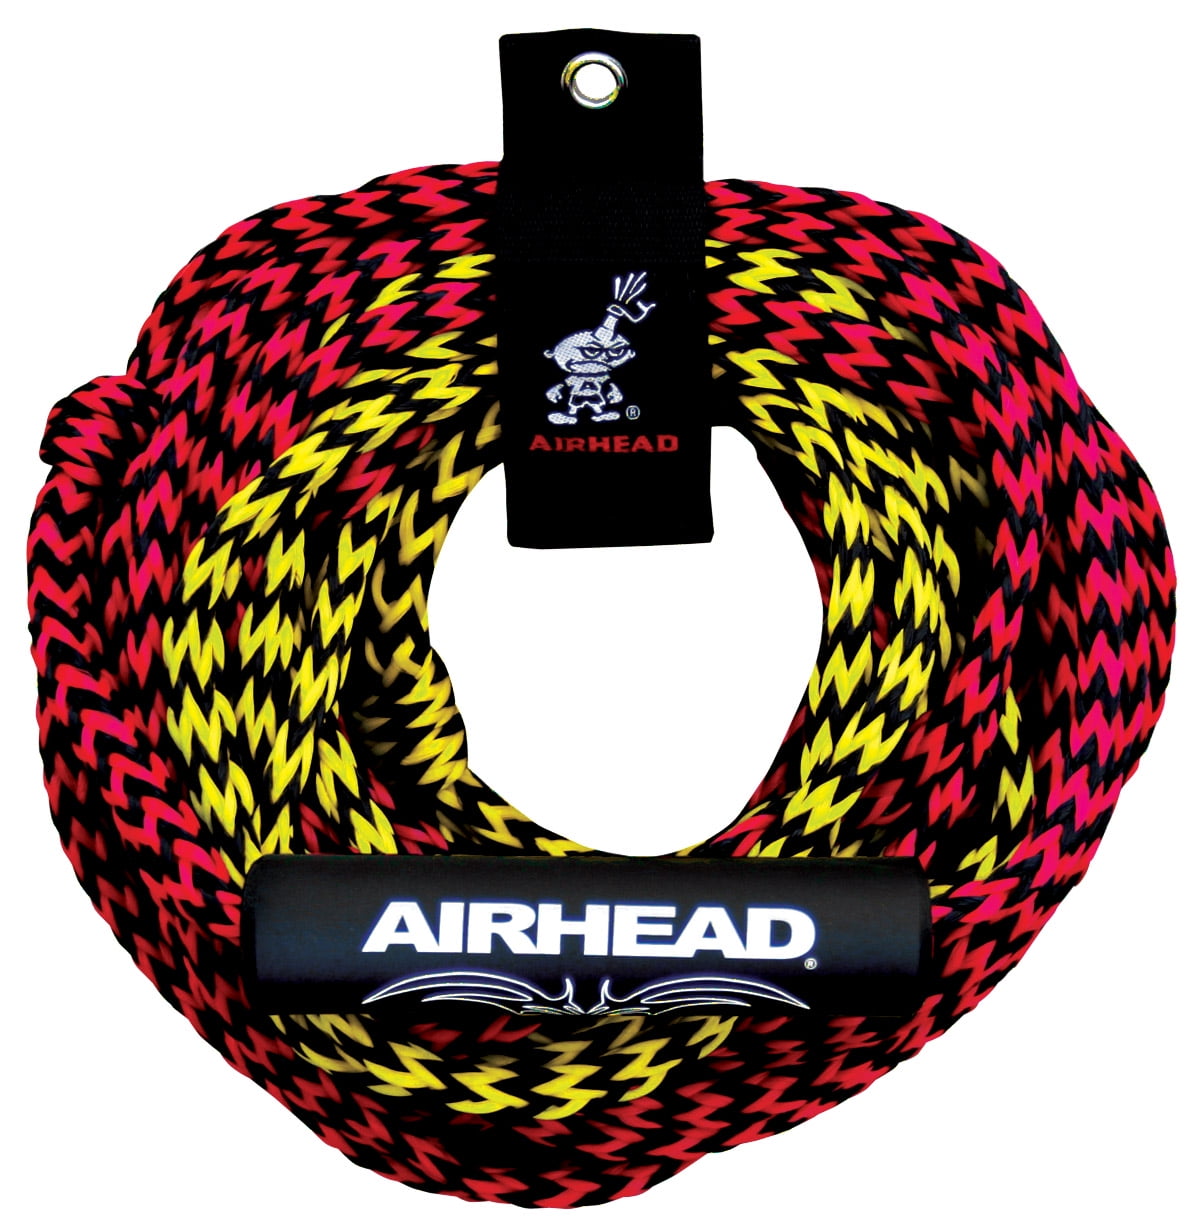 AIRHEAD WMR-20123 Boat Tow Rope for sale online 